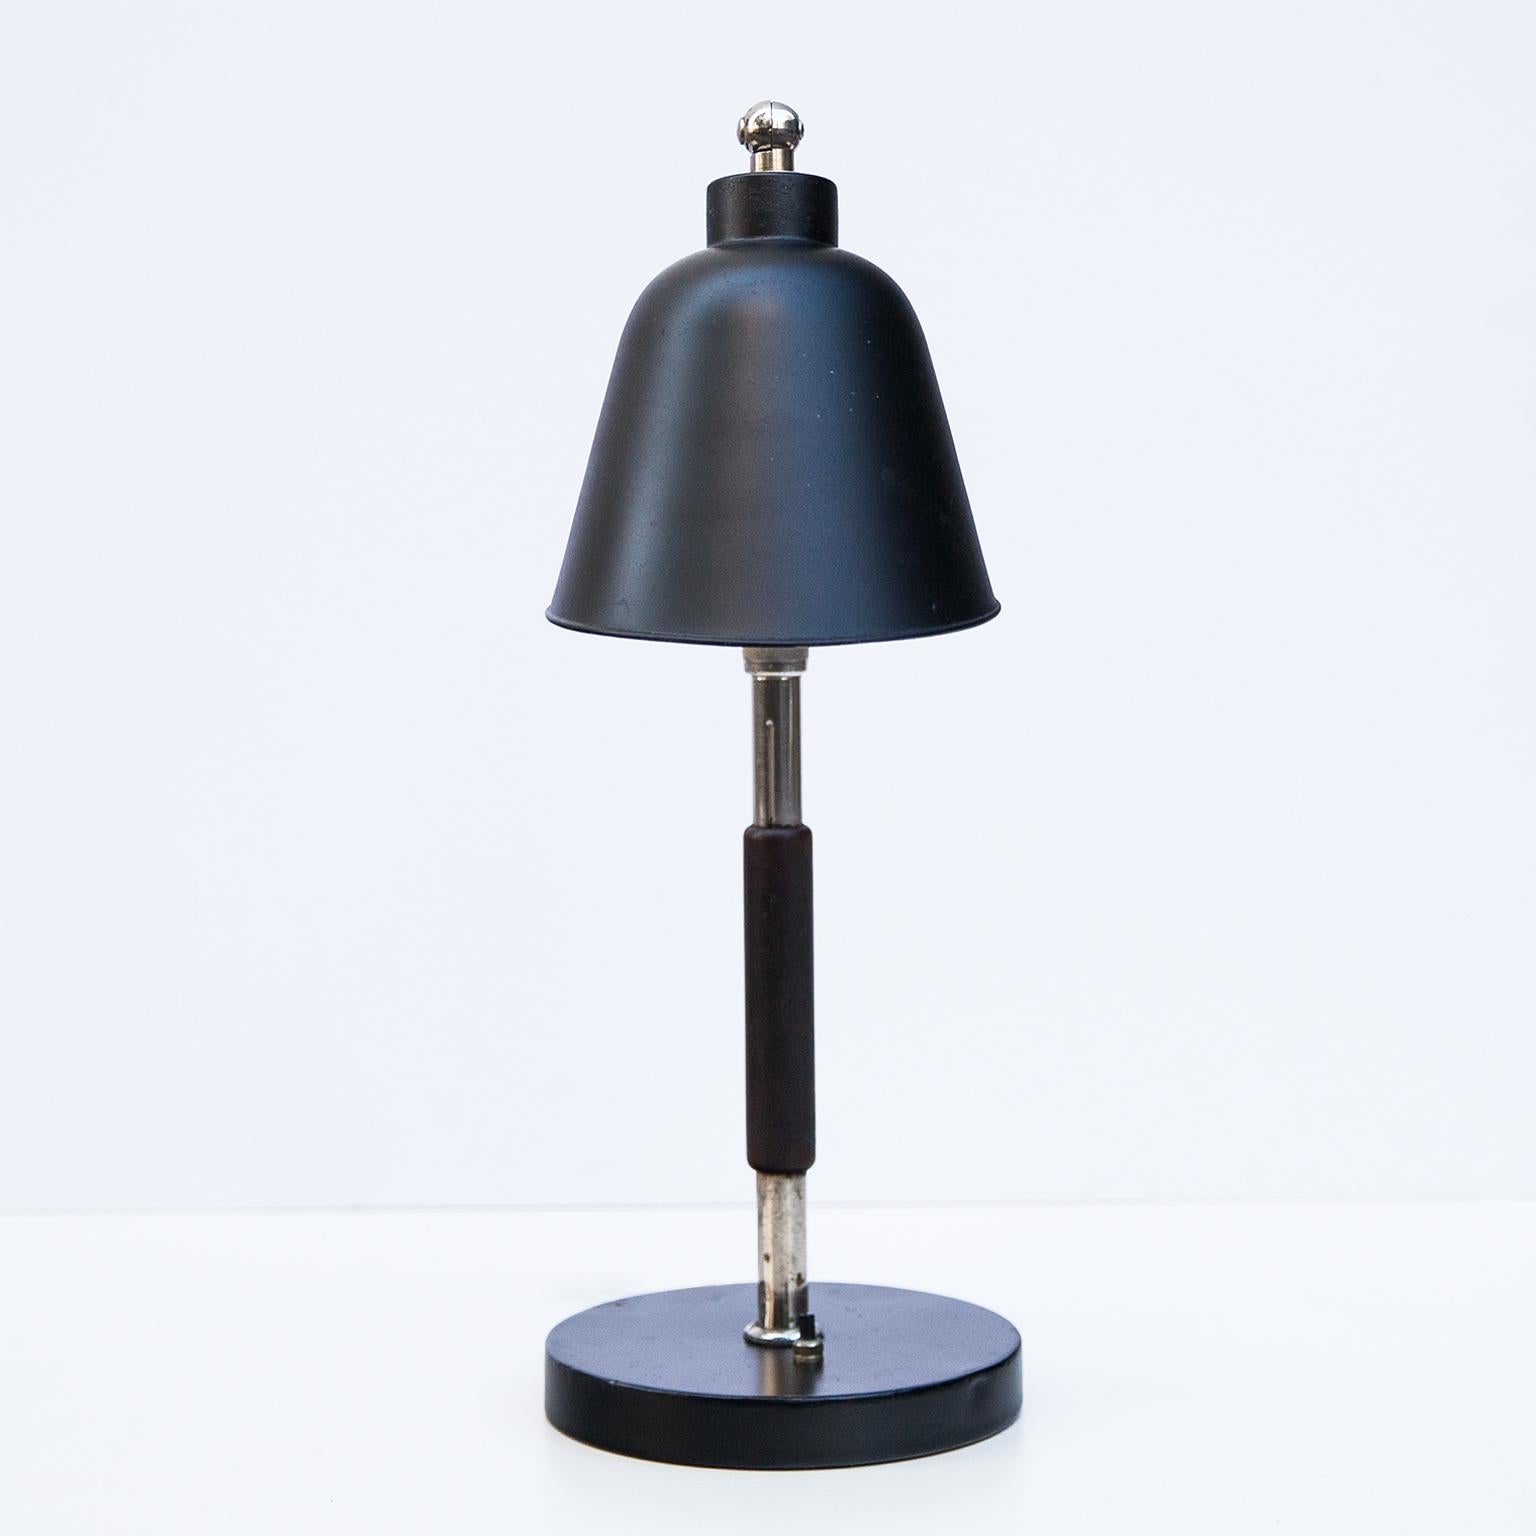 Christian Dell Bauhaus Table Lamp Model 6607, Germany, 1930s In Good Condition For Sale In Munich, DE